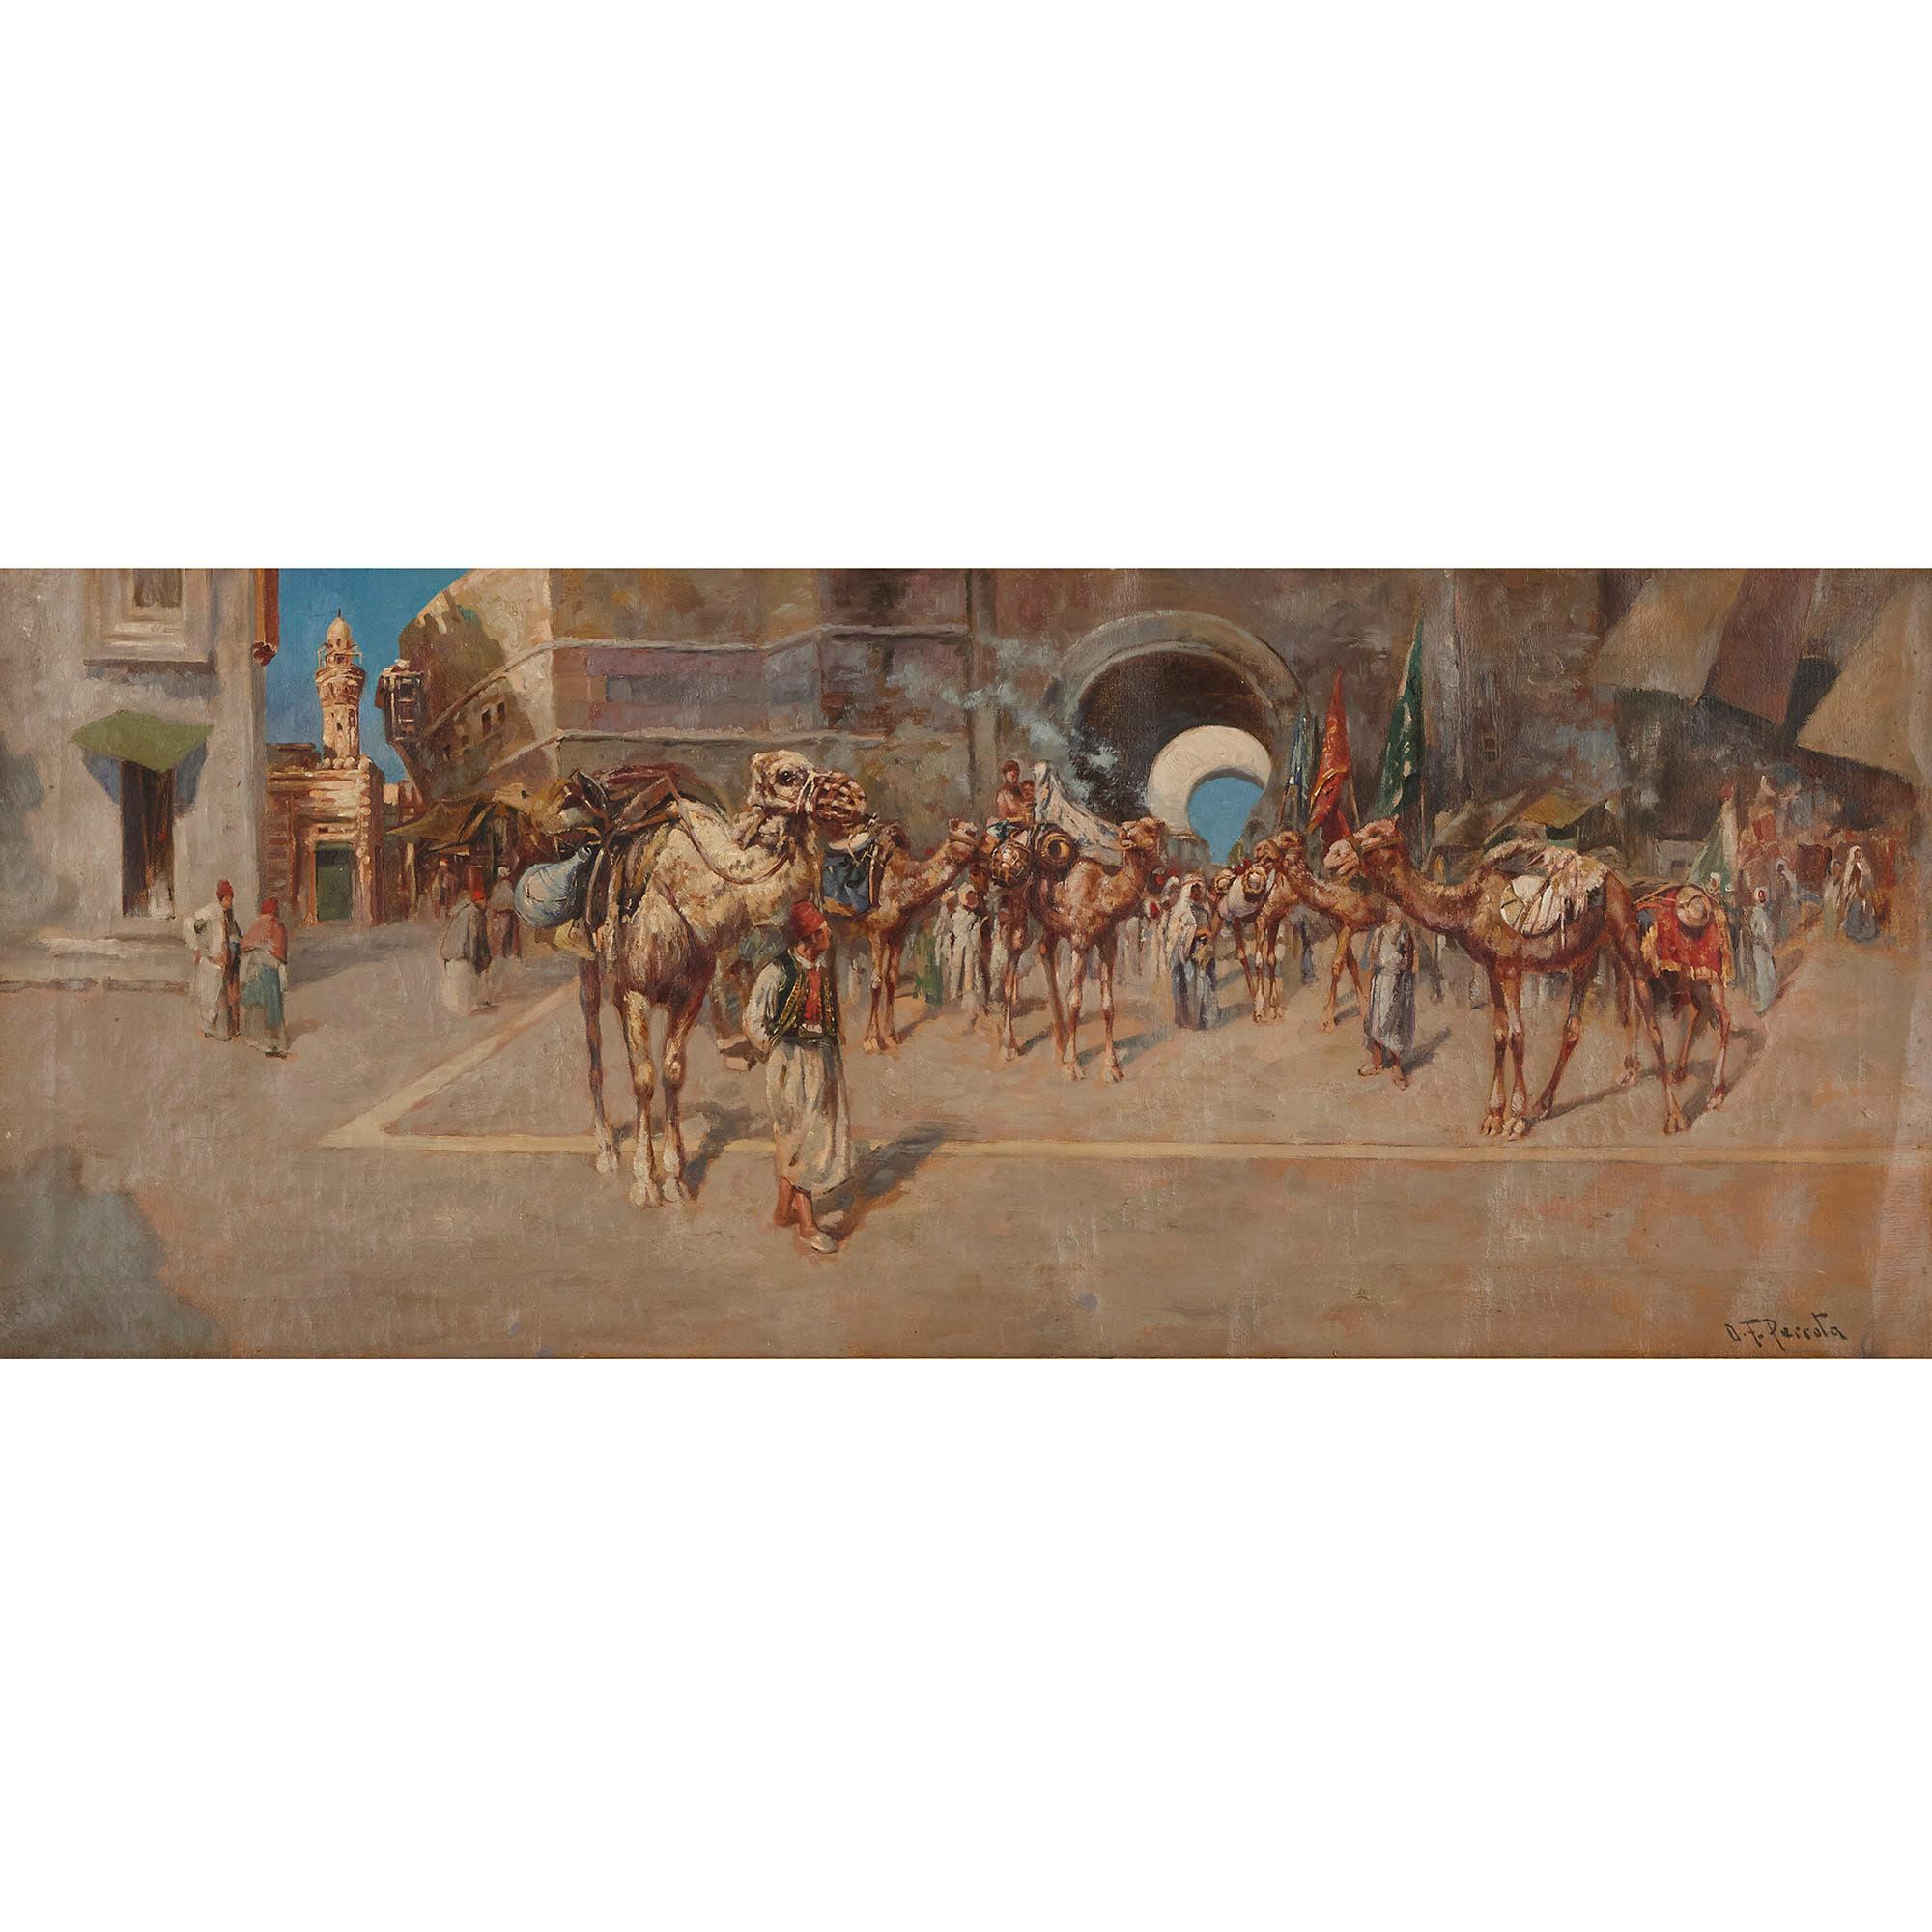 Antique Orientalist painting of Middle Eastern scene  - Painting by O. F. Perrota